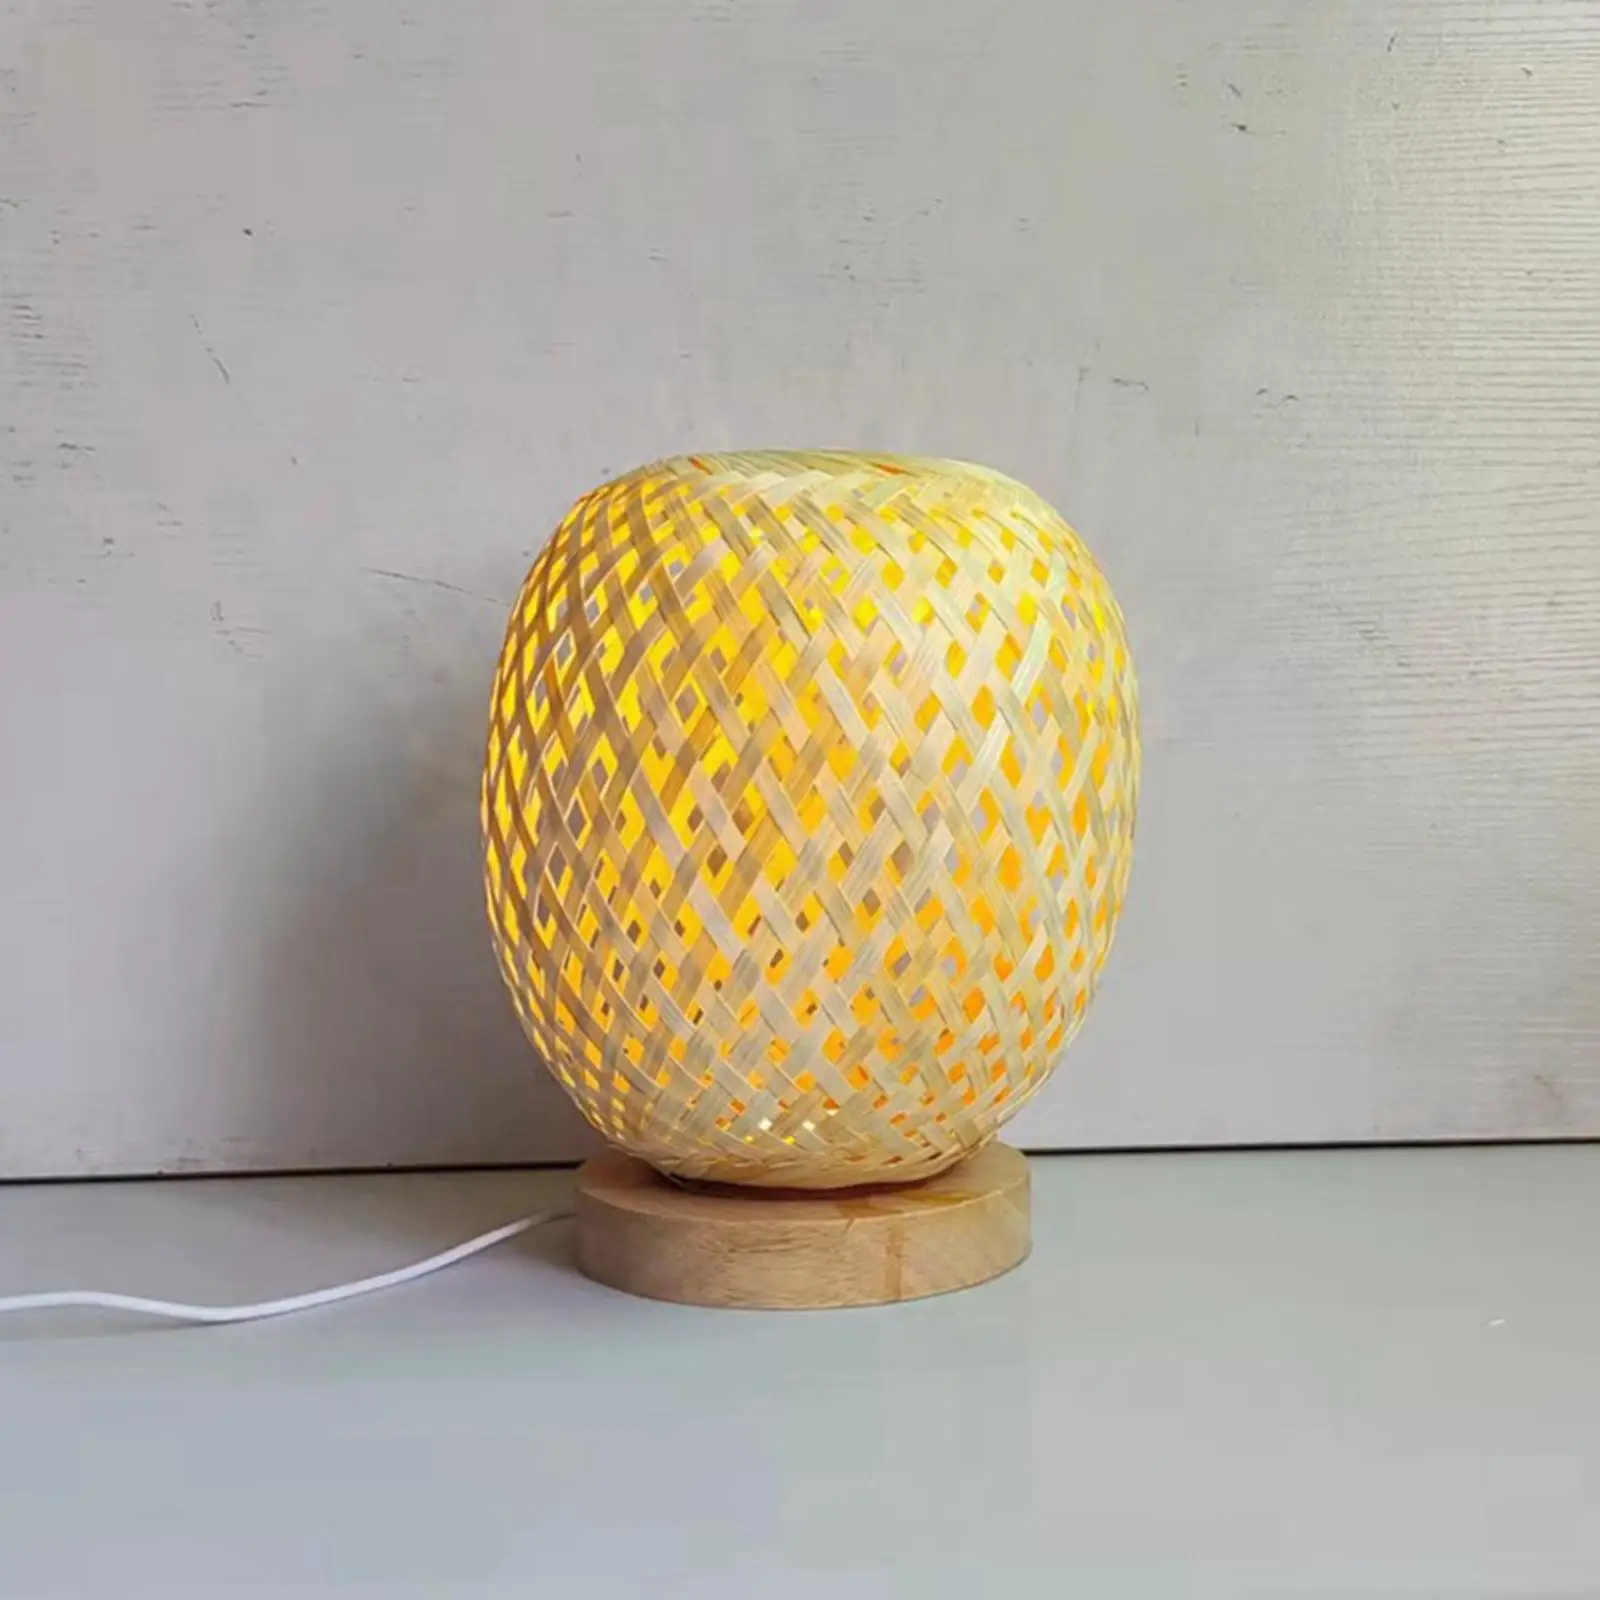 Vintage Bamboo Weaving Table Lamp USB Charging with Wooden Base Home Decor Desk Lamp NightStand Lamp for Bedroom Study Room Cafe